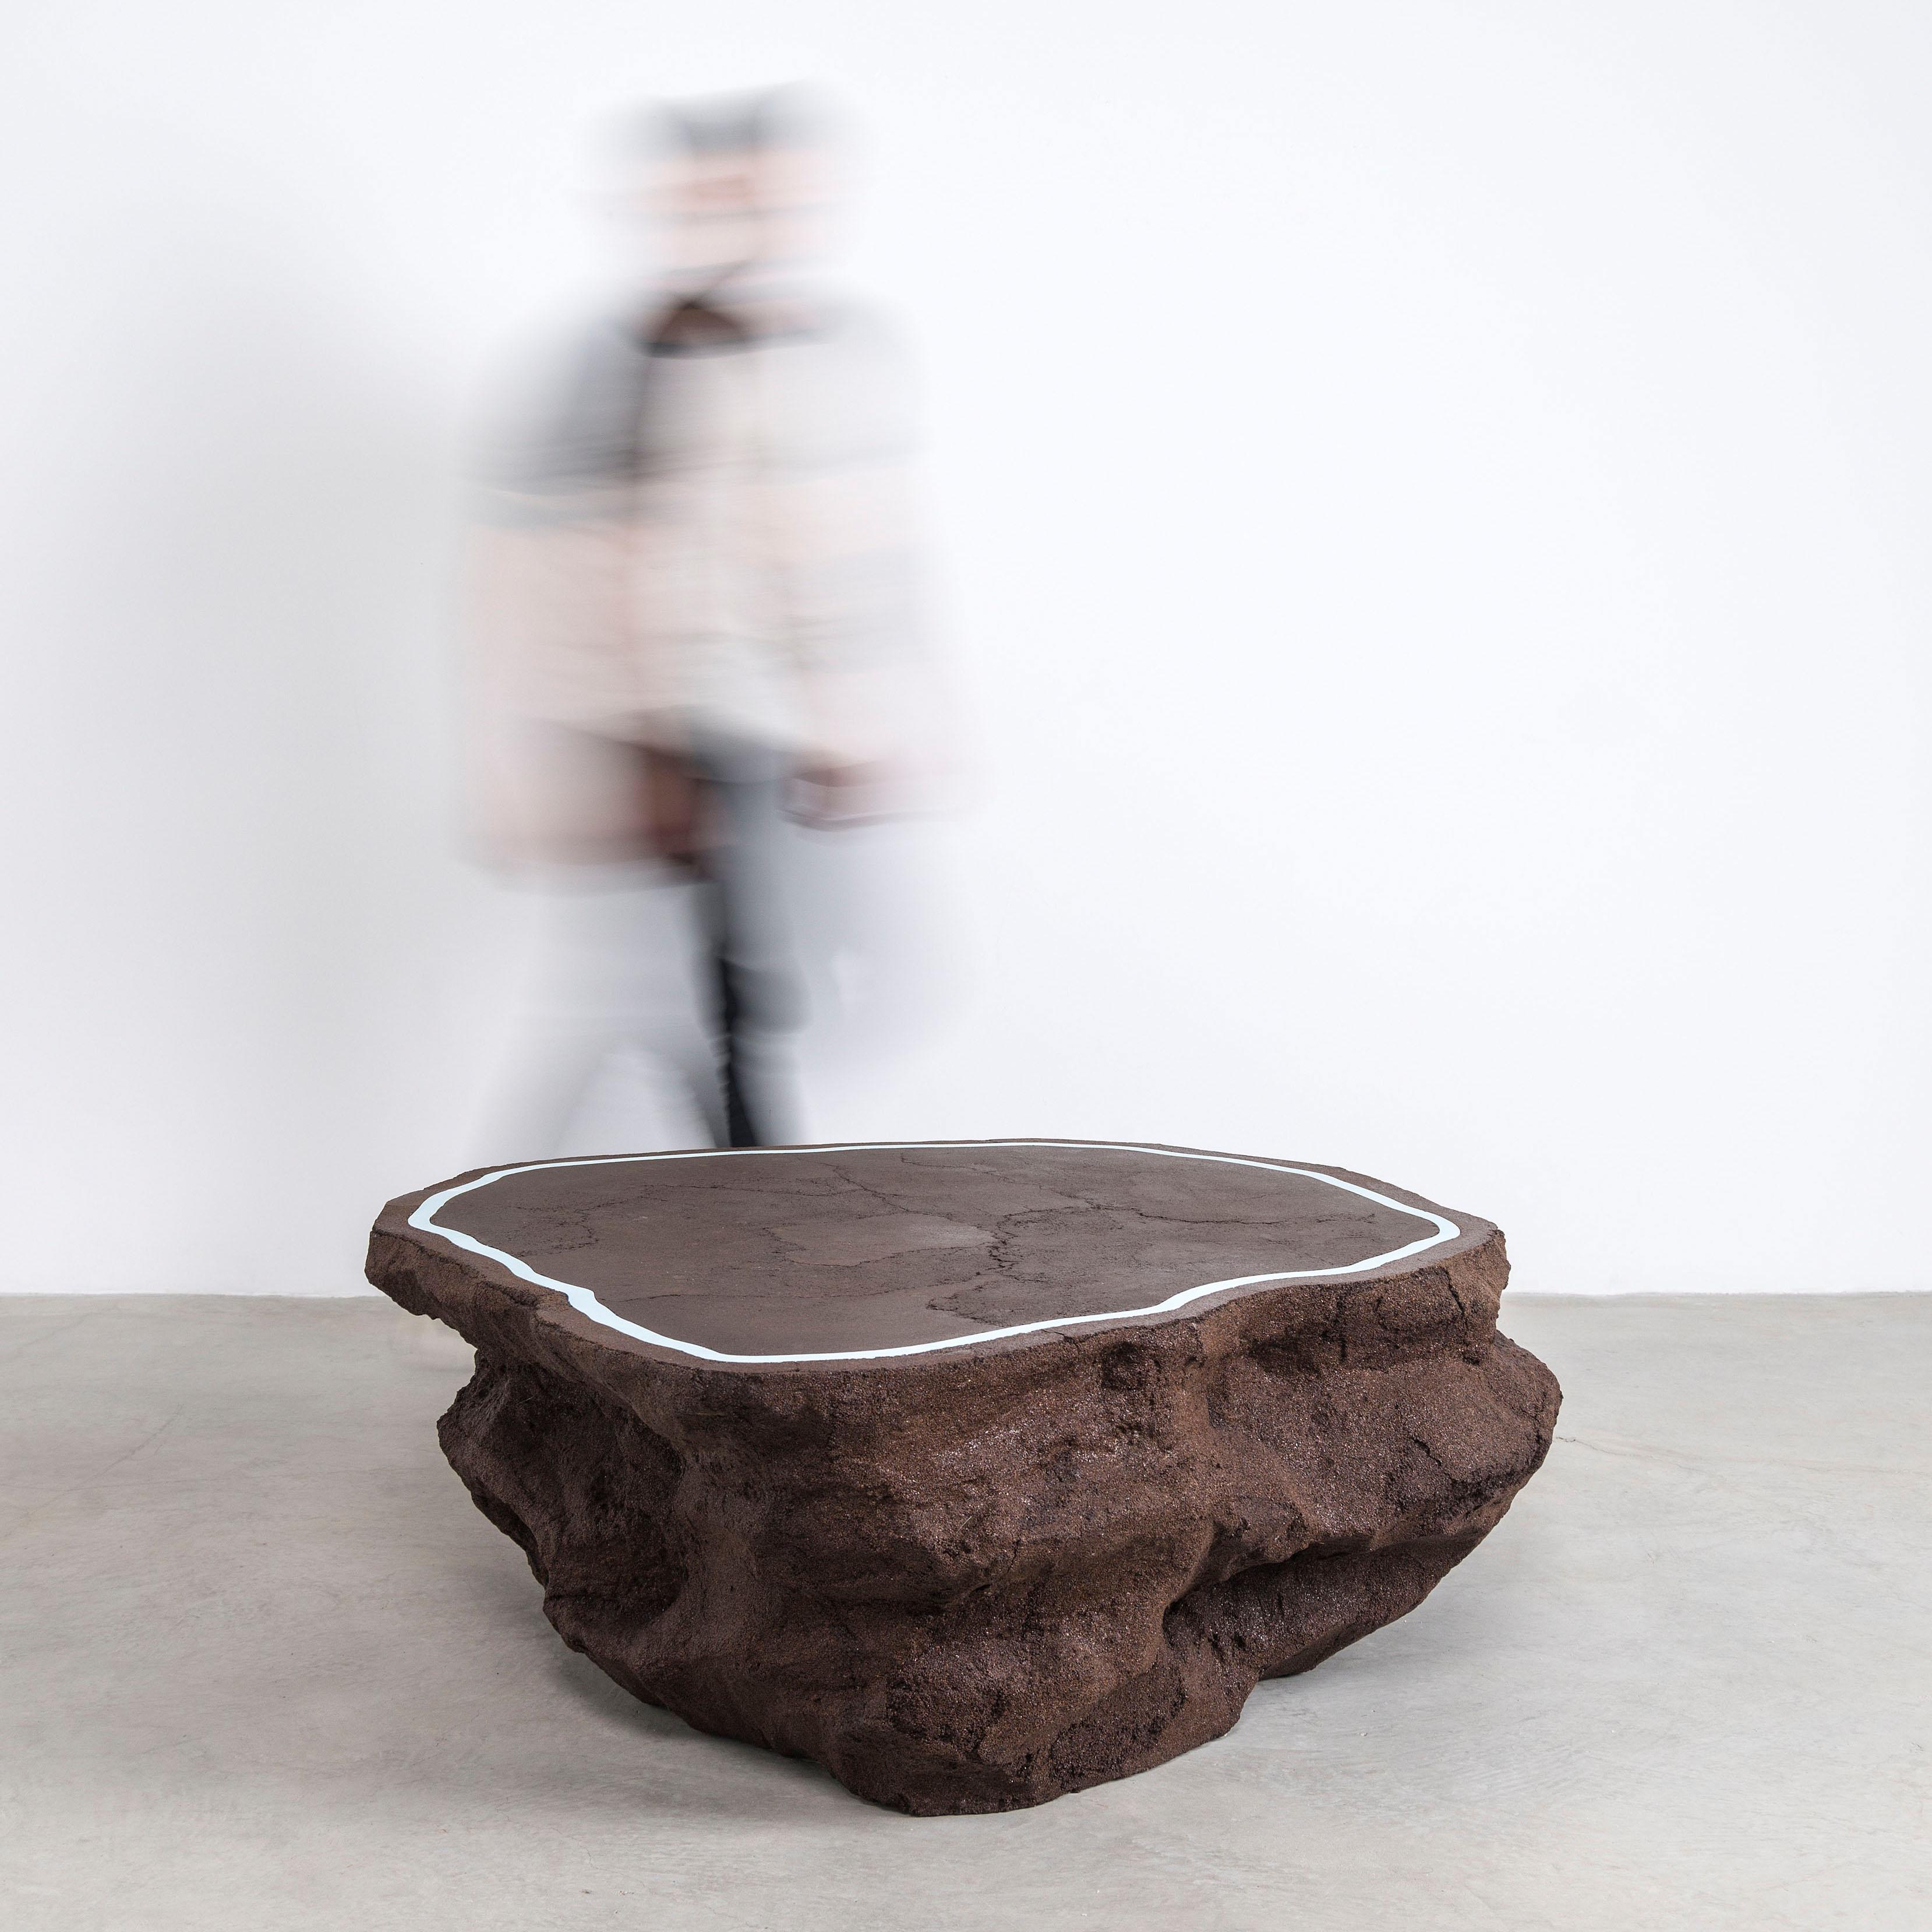 Composed in a language of landscape-oriented abstraction, the made-to-order coffee table is cast from entirely in coffee grounds. A humorous and striking combination, the organic, textural mass contrasts the slick, cement-inlaid top. 